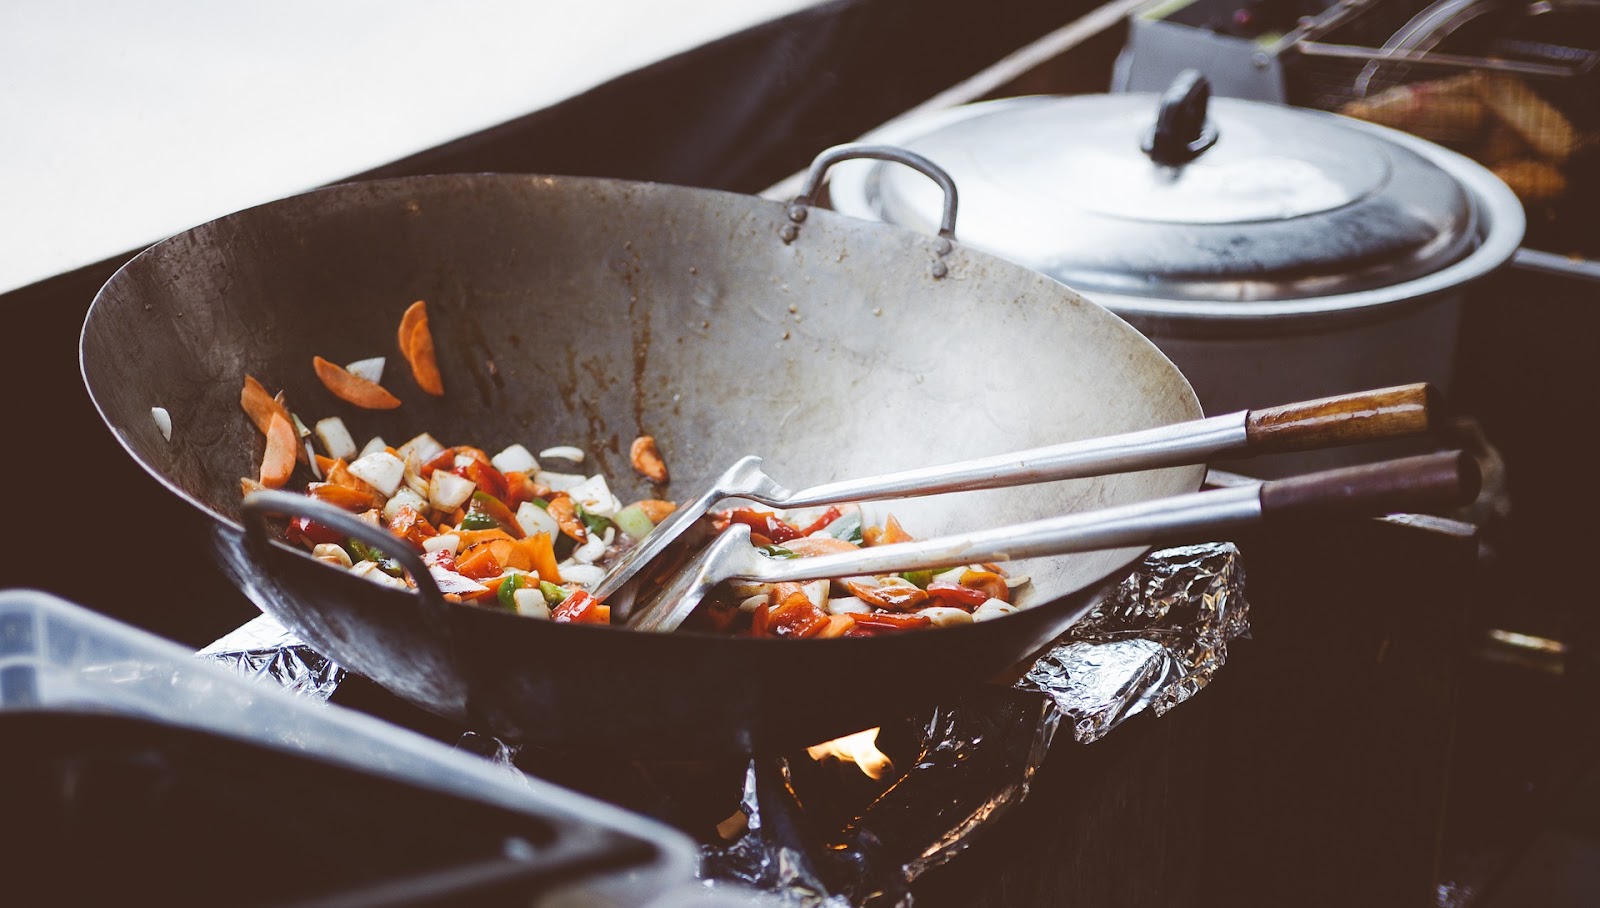 Close up of a wok and stove representing the challenges of content marketing for food